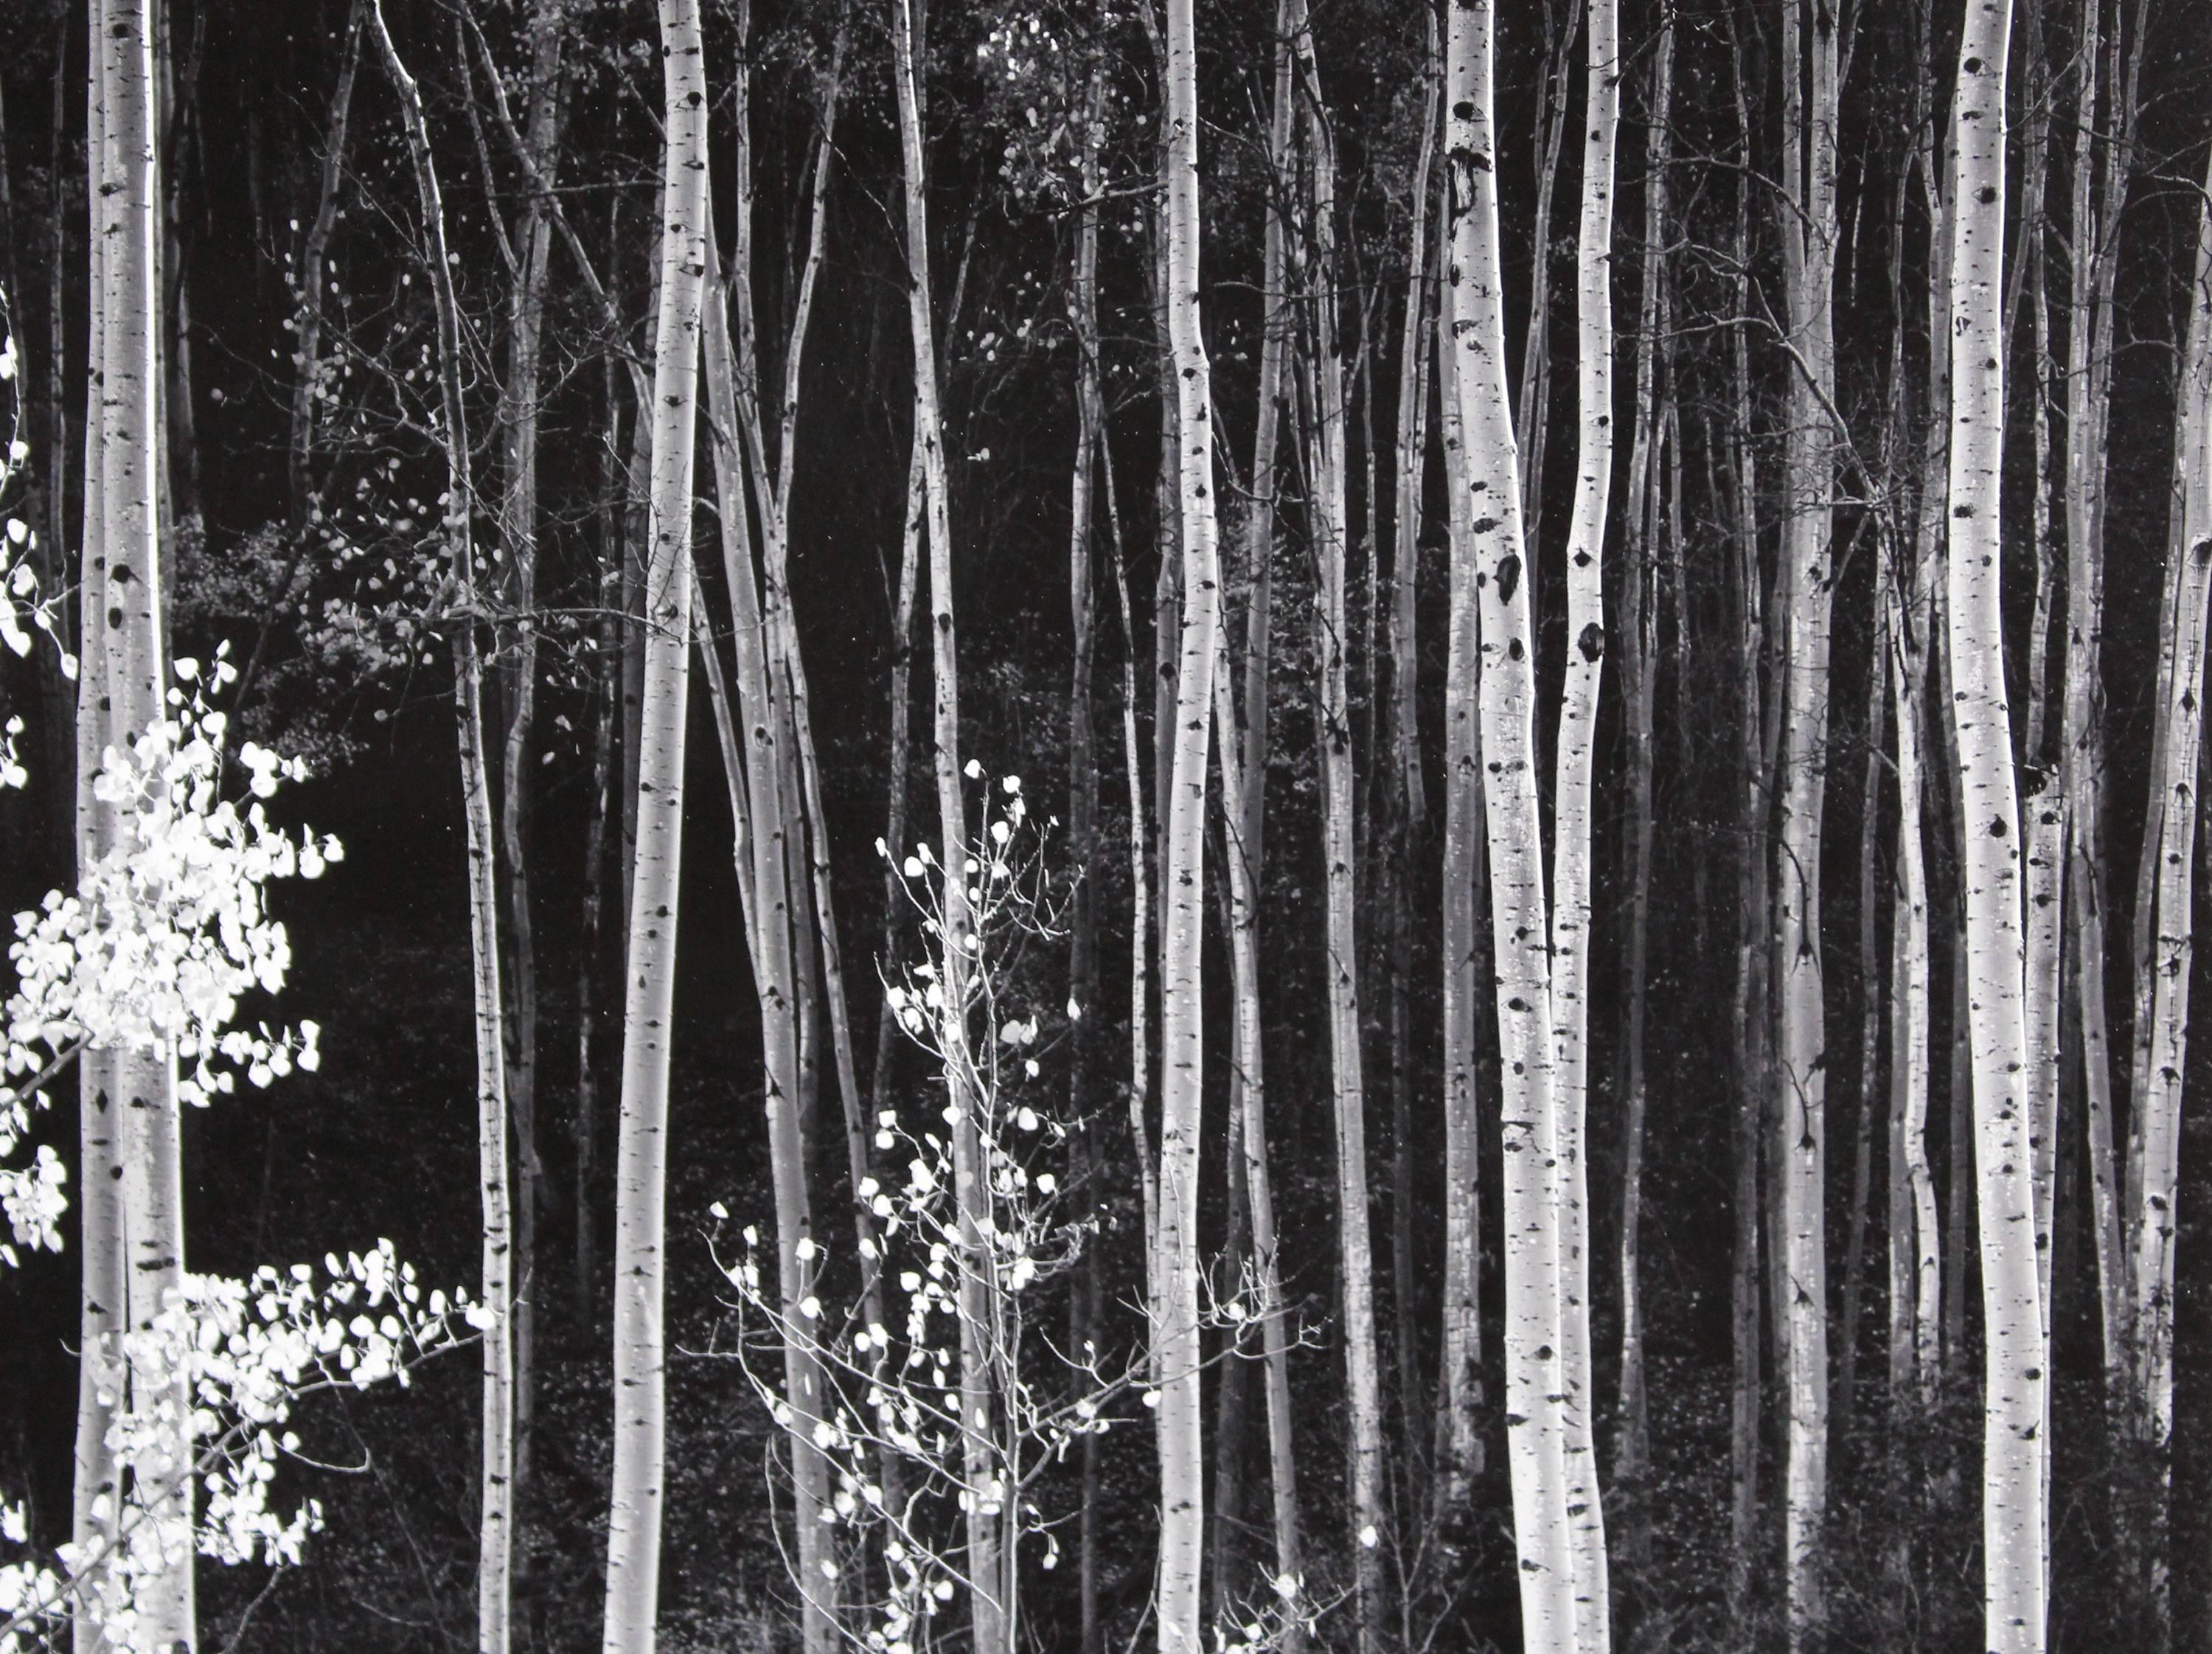 A silver gelatin print mounted on board depicting Aspen trees in Northern New Mexico by iconic American photographer Ansel Adams. Aspens, Northern New Mexico is signed lower right, 